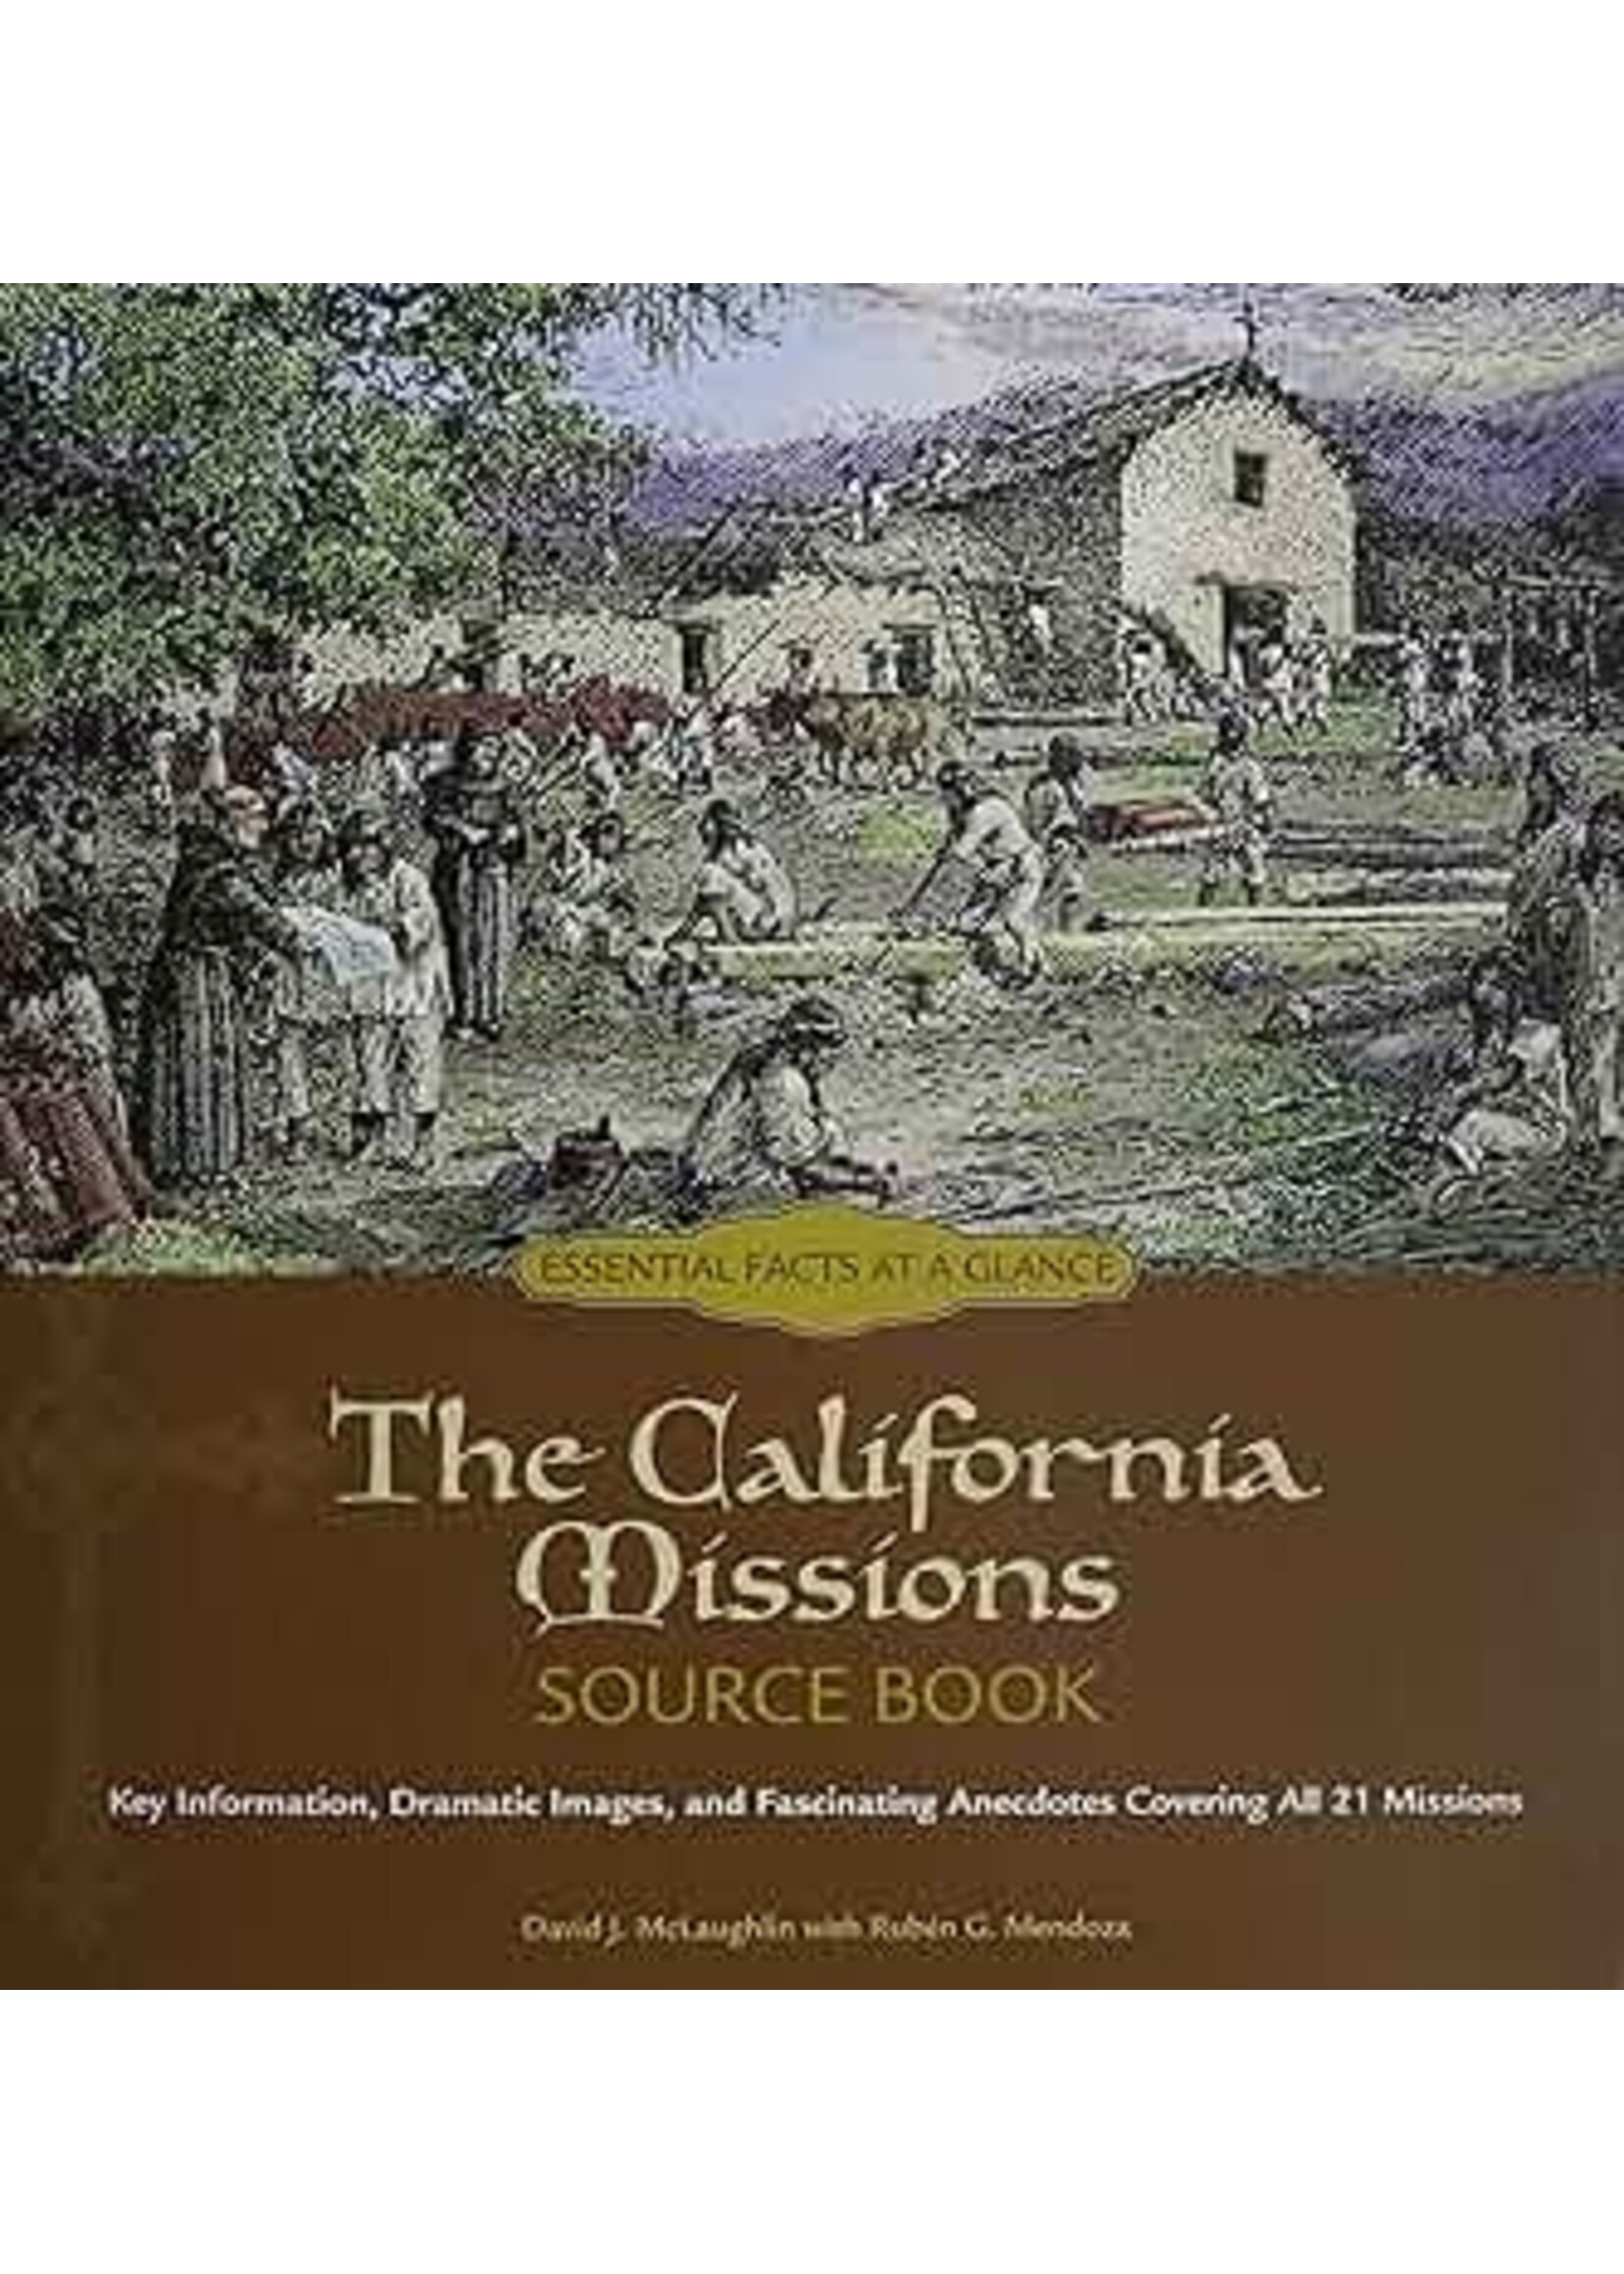 The California Missions Source Book